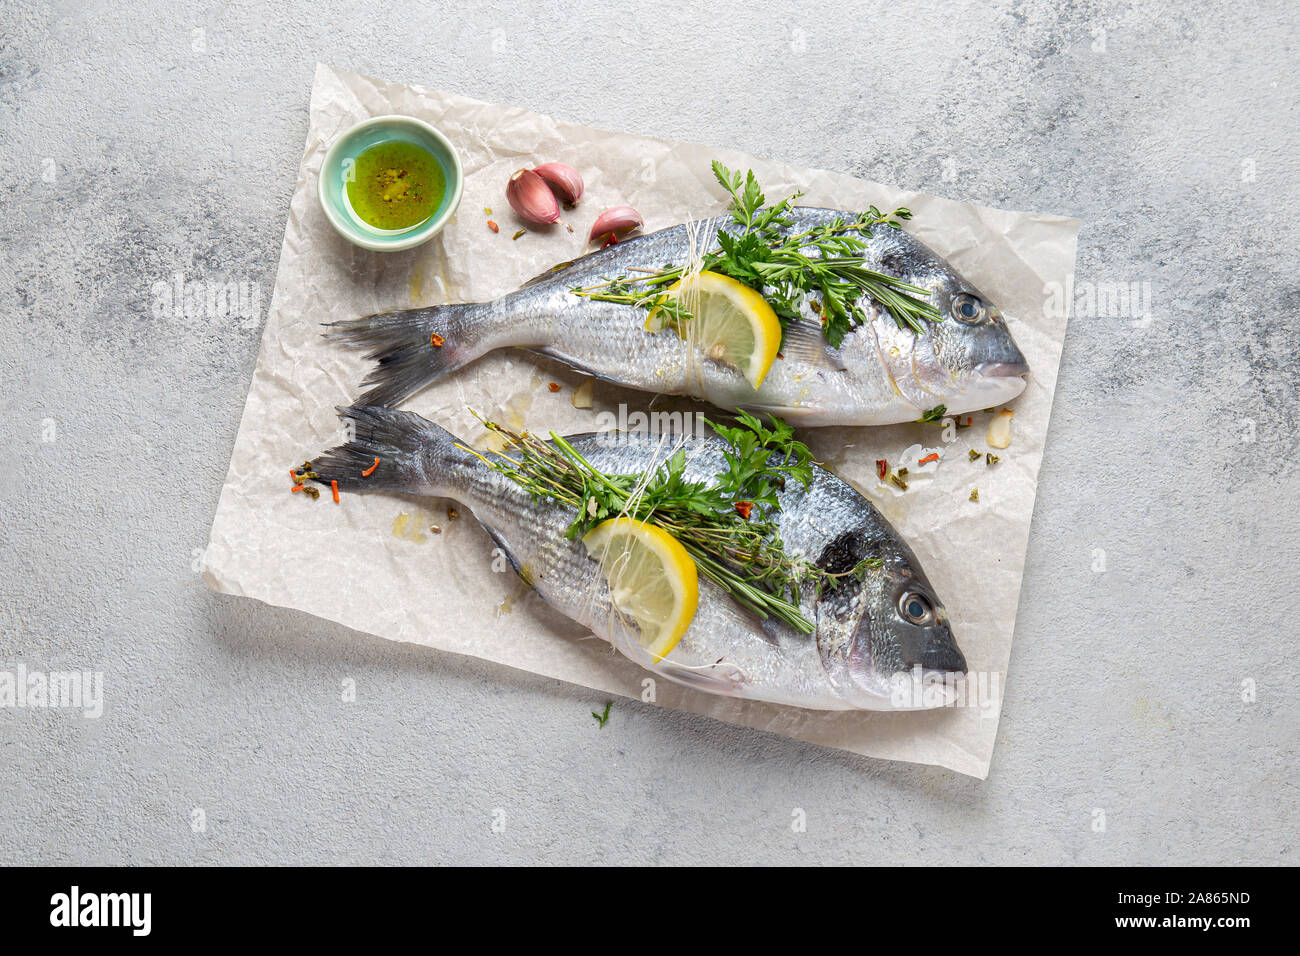 Dorada fish, raw fresh sea bream with lemon and herbs on a grey stone background, top view. Stock Photo